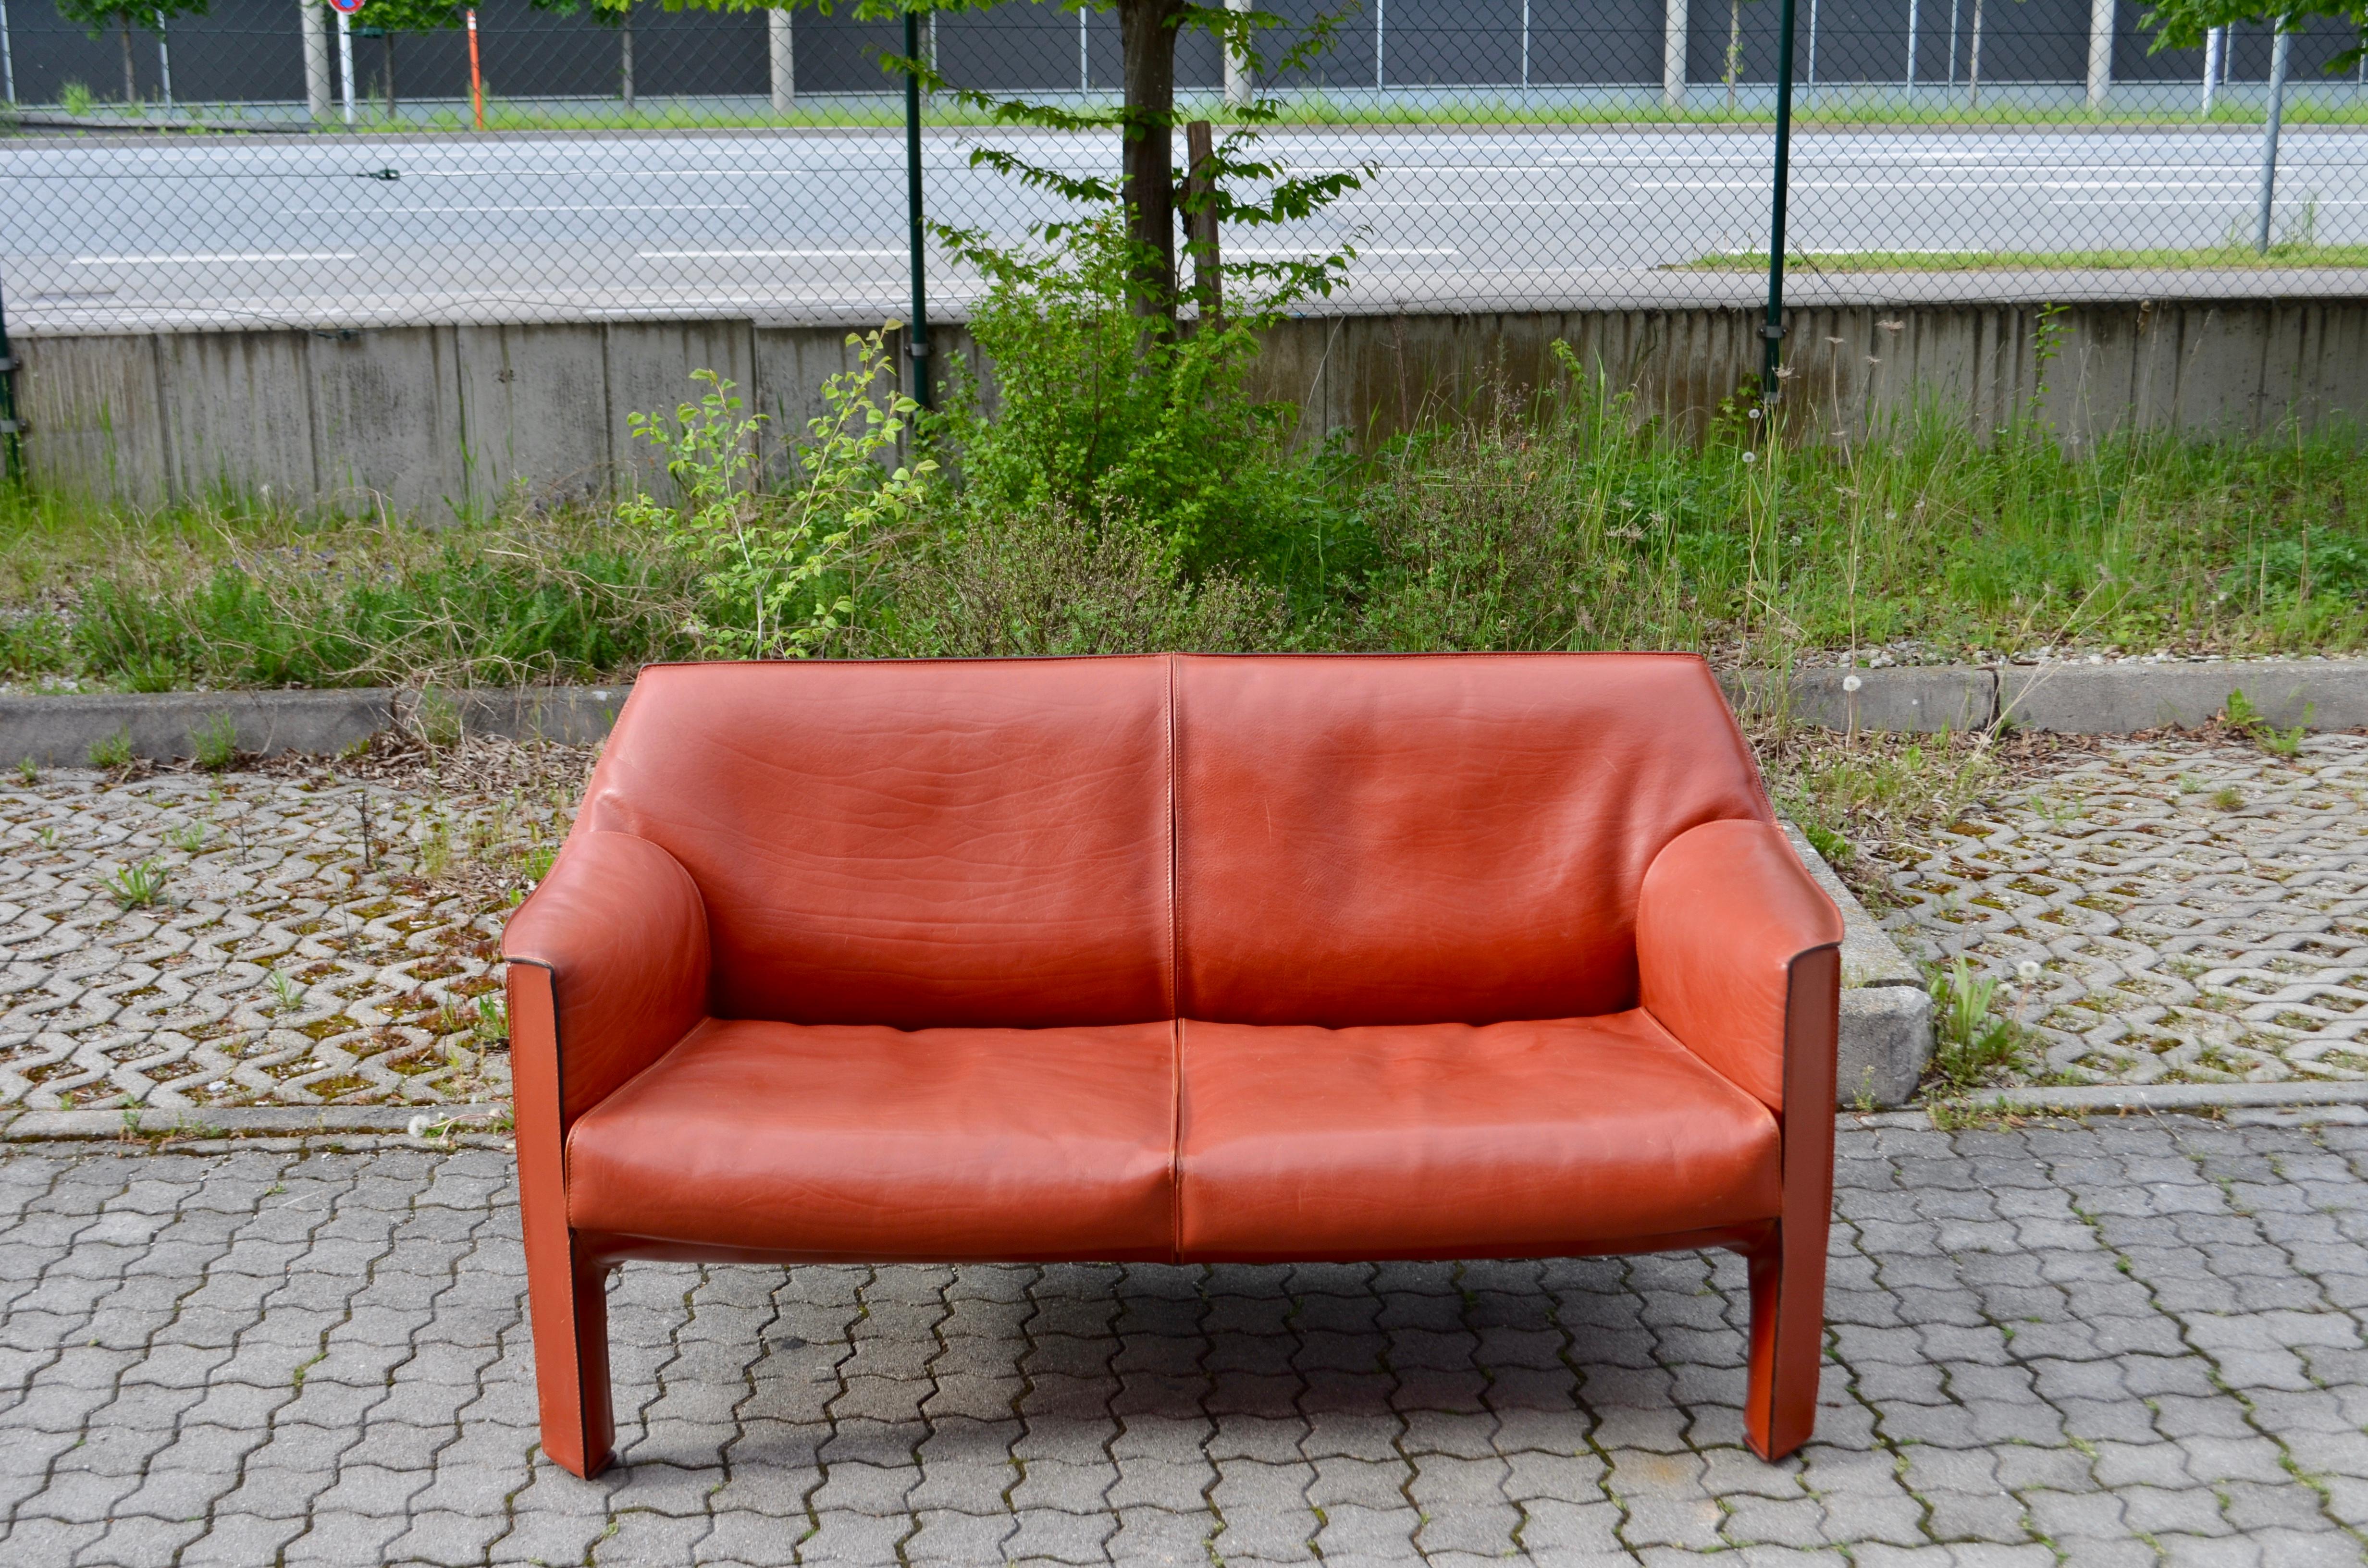 This Cab 415 sofa was designed by Mario Bellini for Italian manufacturer Cassina.
It´s the thick padding cushions with comfortable seat.
Neckleather was used on the seat and back cushions.
On the back and side the saddle leather was used.
It is